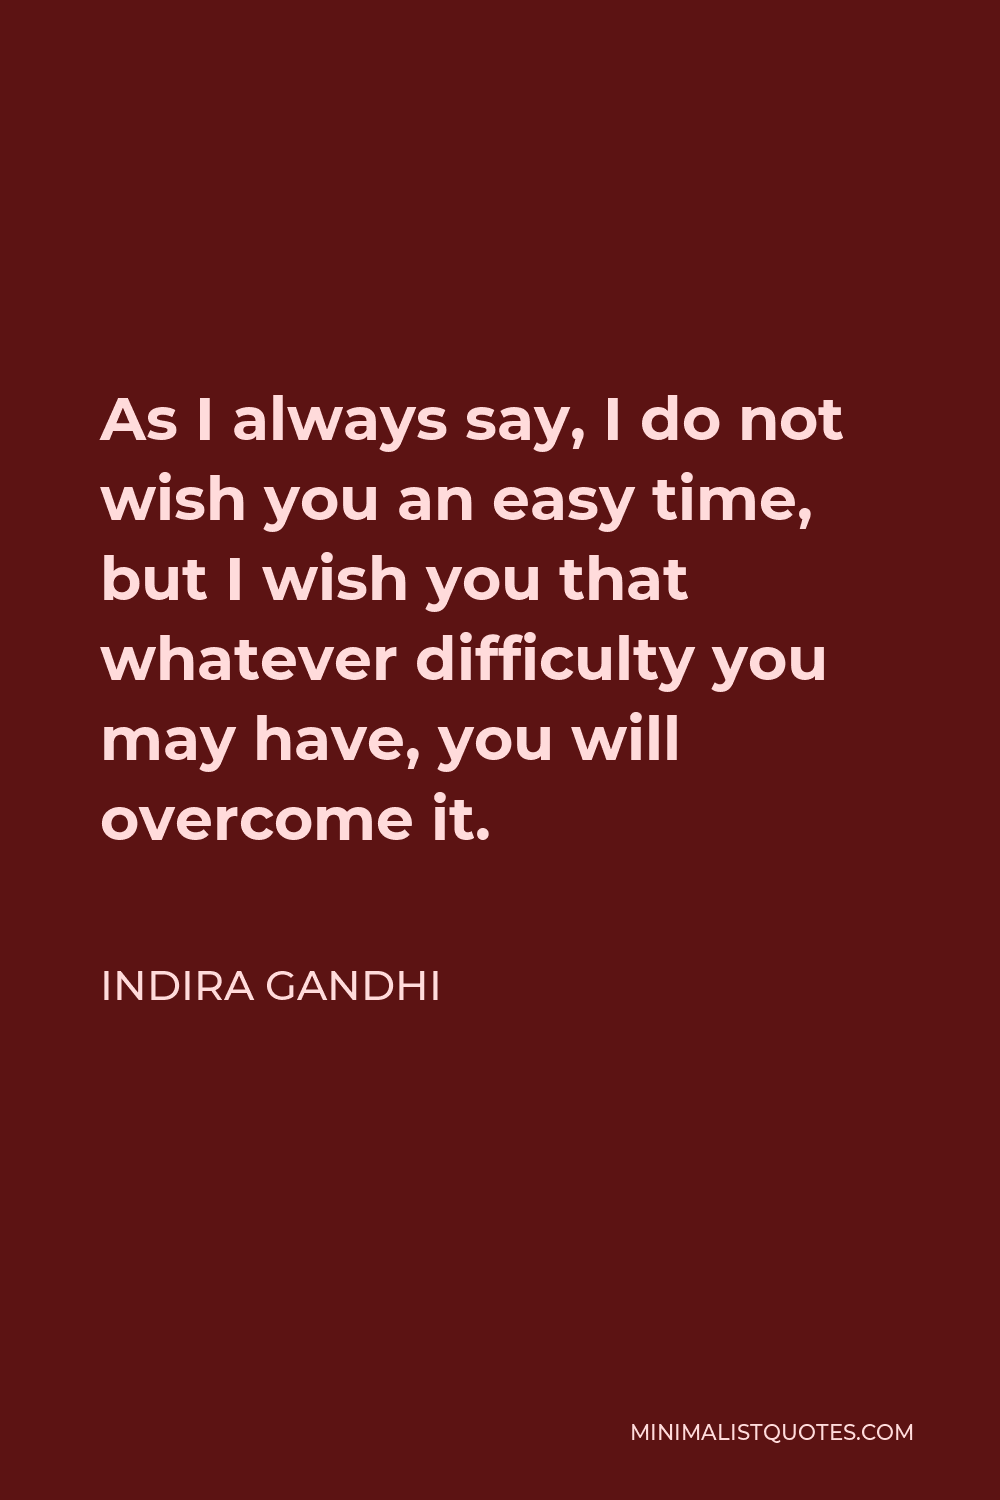 Indira Gandhi Quote - As I always say, I do not wish you an easy time, but I wish you that whatever difficulty you may have, you will overcome it.